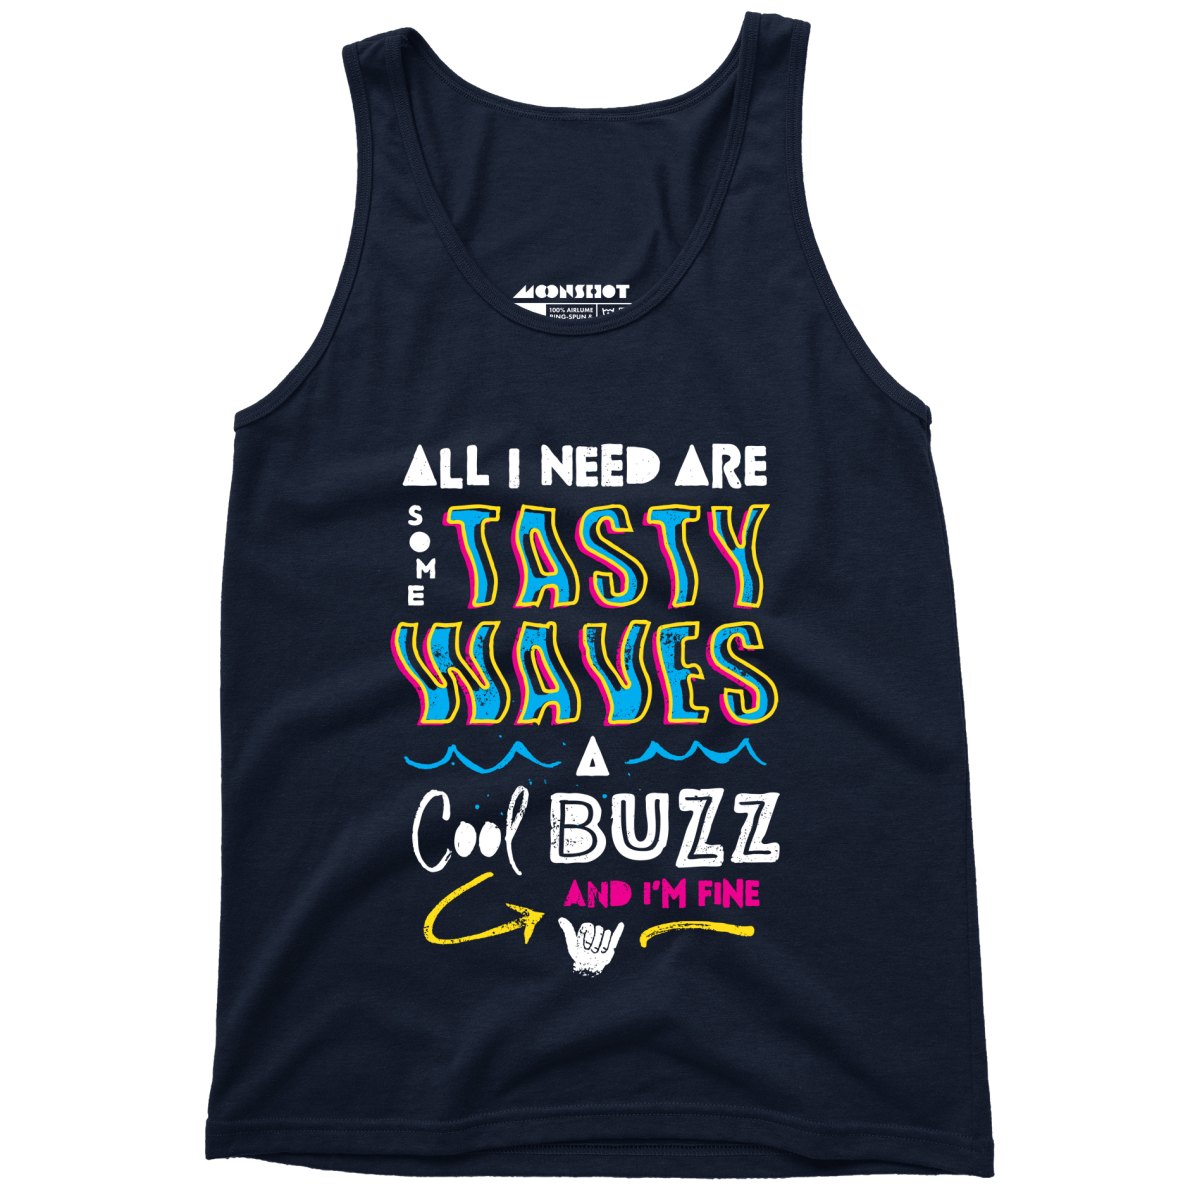 All I Need Are Some Tasty Waves a Cool Buzz and I'm Fine - Unisex Tank Top